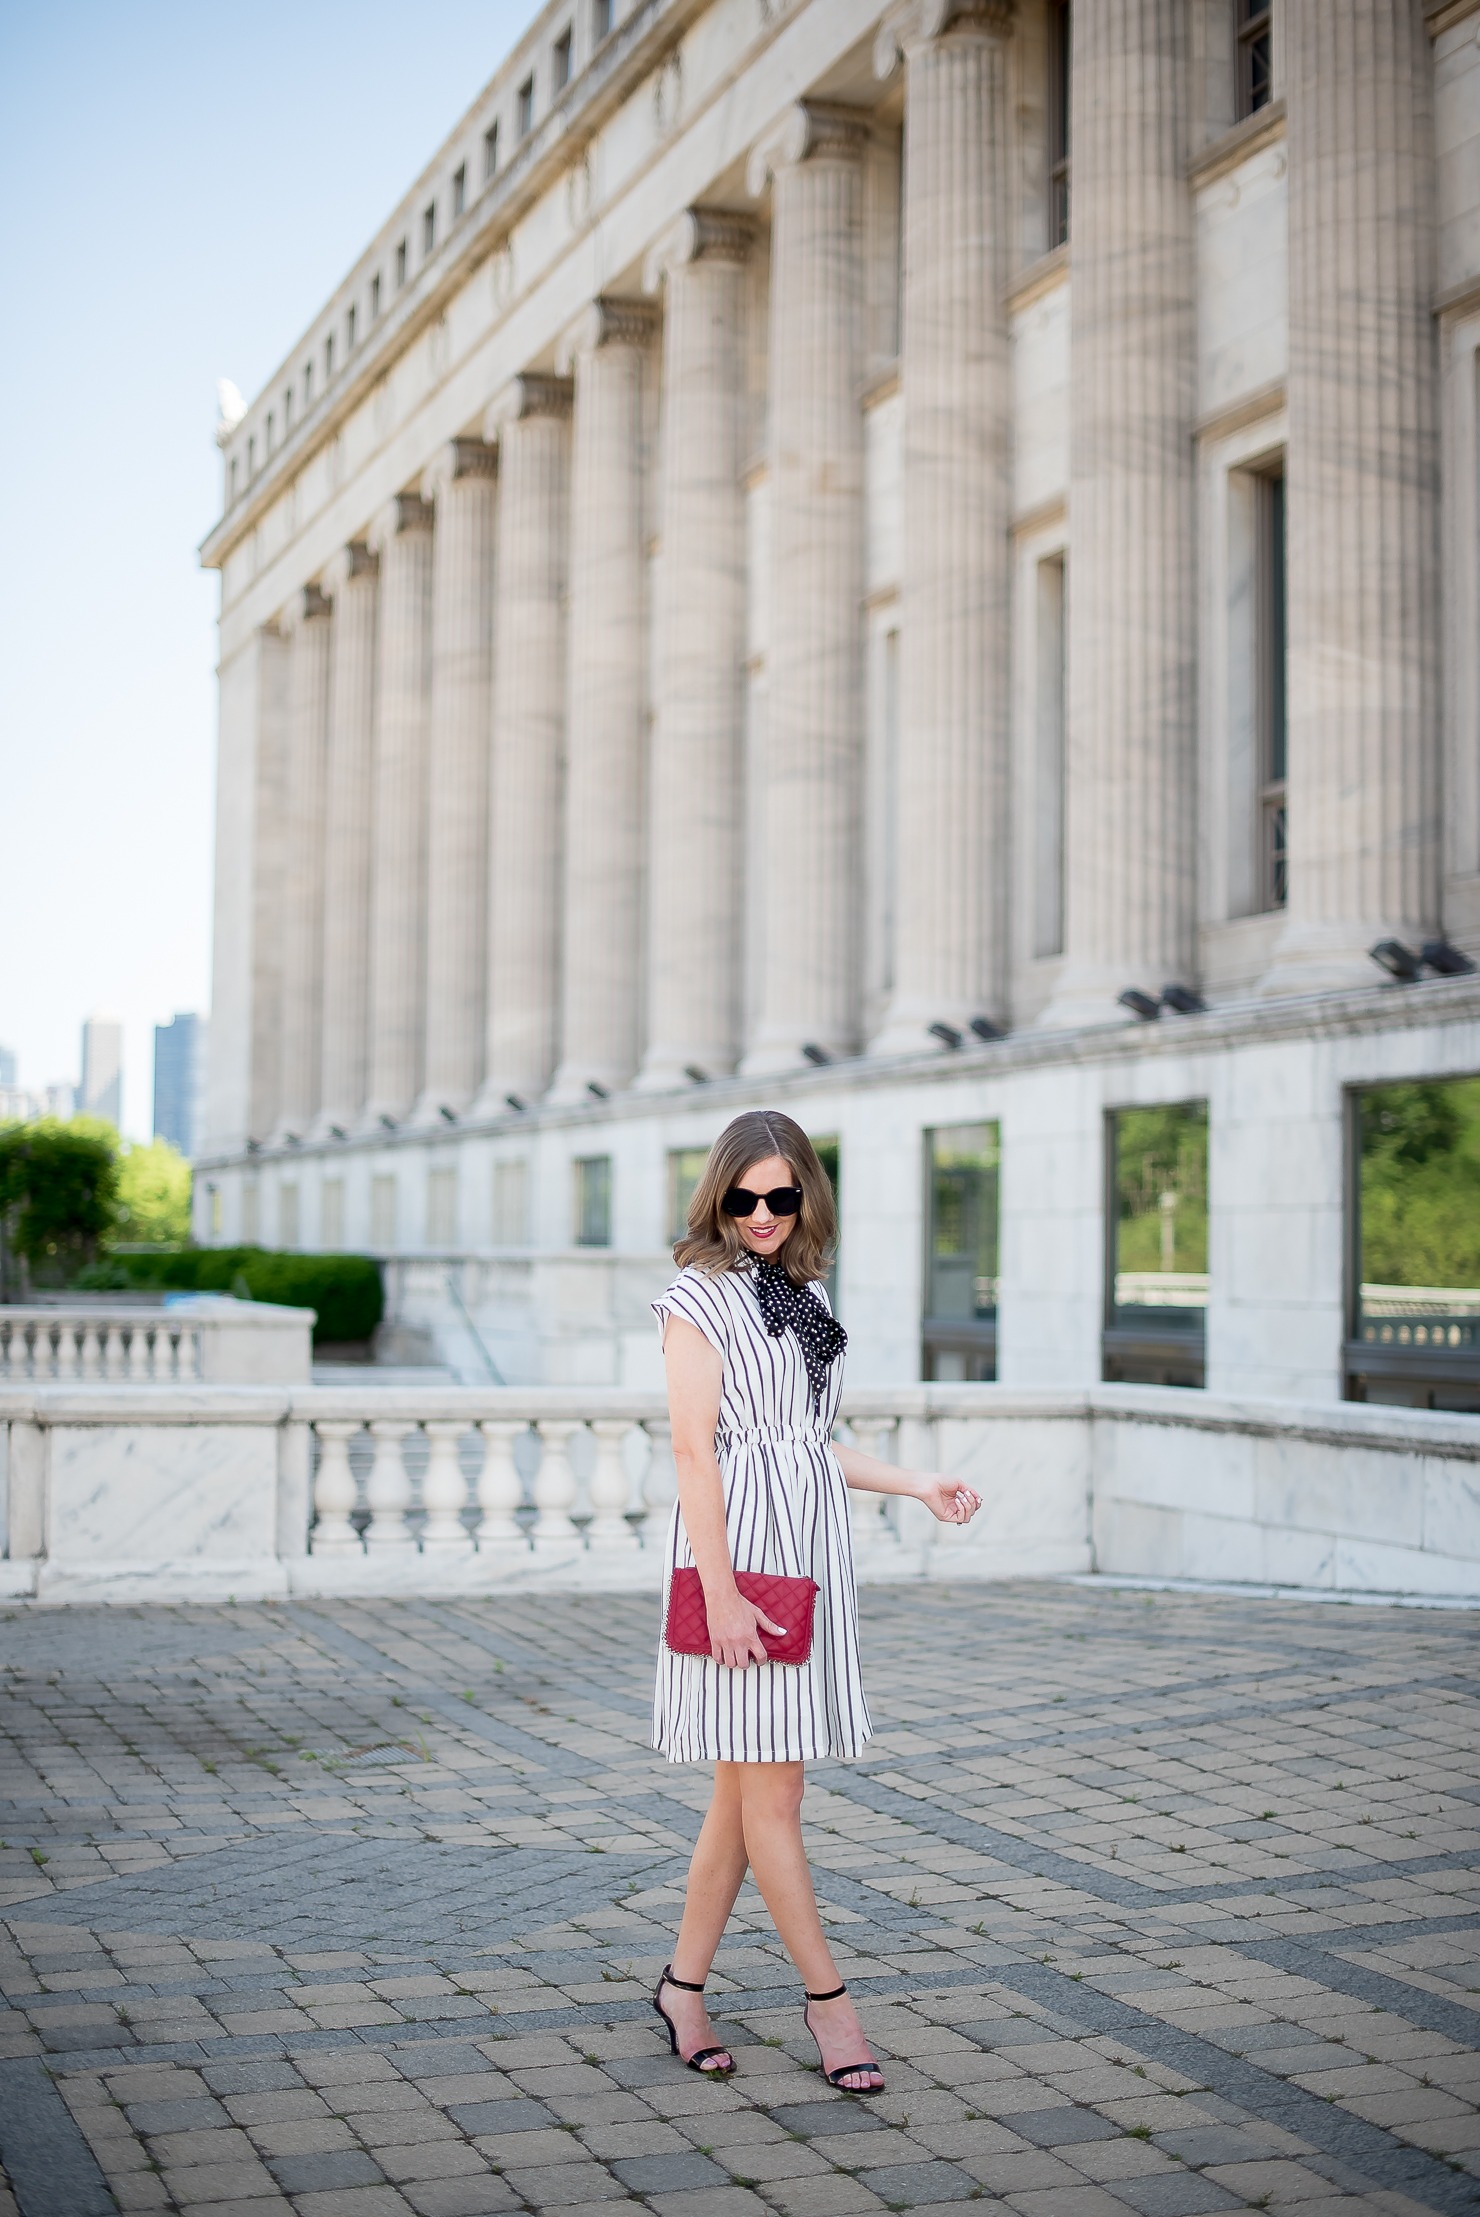 print-mixing-choies-white-and-black-striped-dress-forever-21-red-quilted-chain-clutch-black-strappy-heels-chicago-field-museum